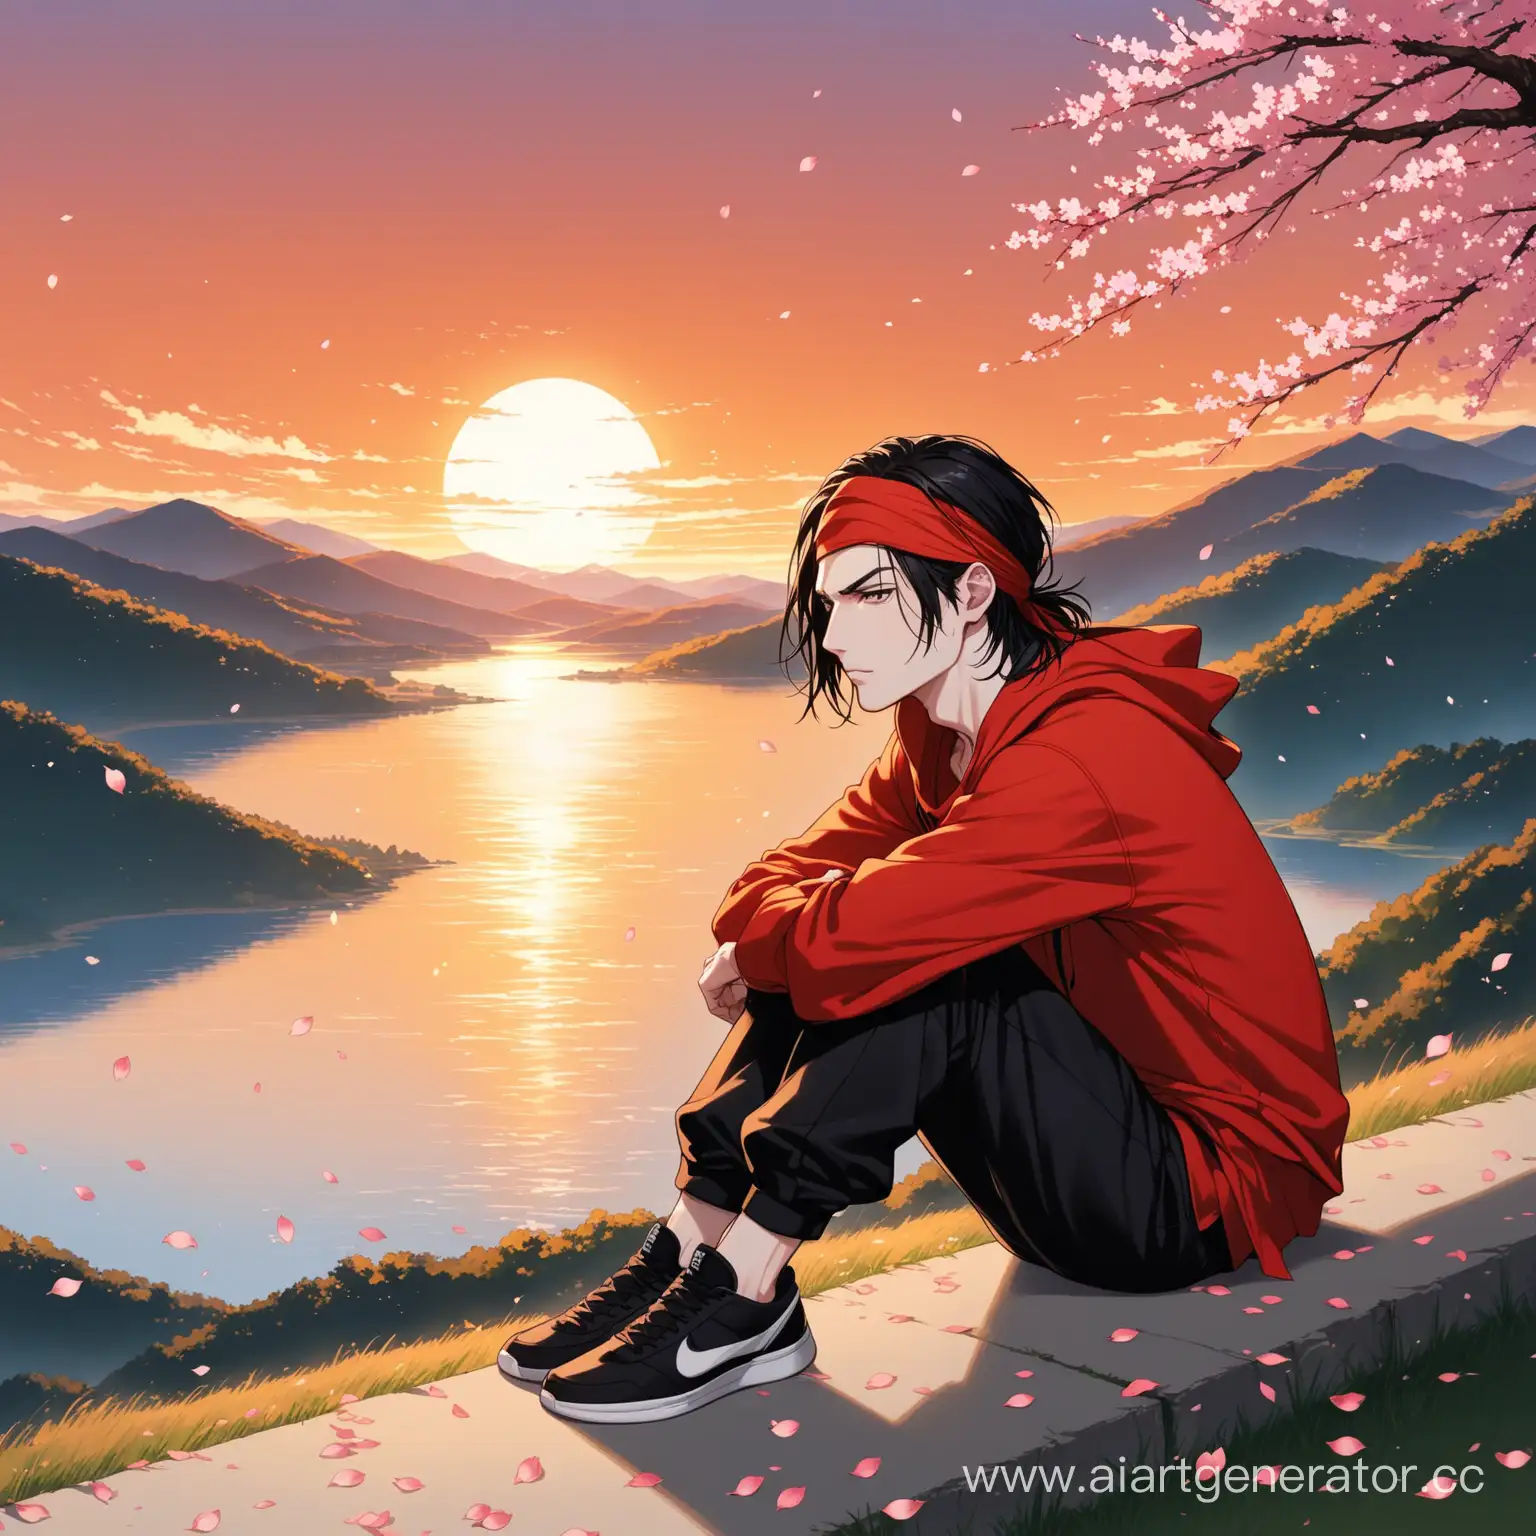 Pale-Young-Man-with-Red-Hoodie-and-Bandana-Sitting-by-Lake-at-Sunset